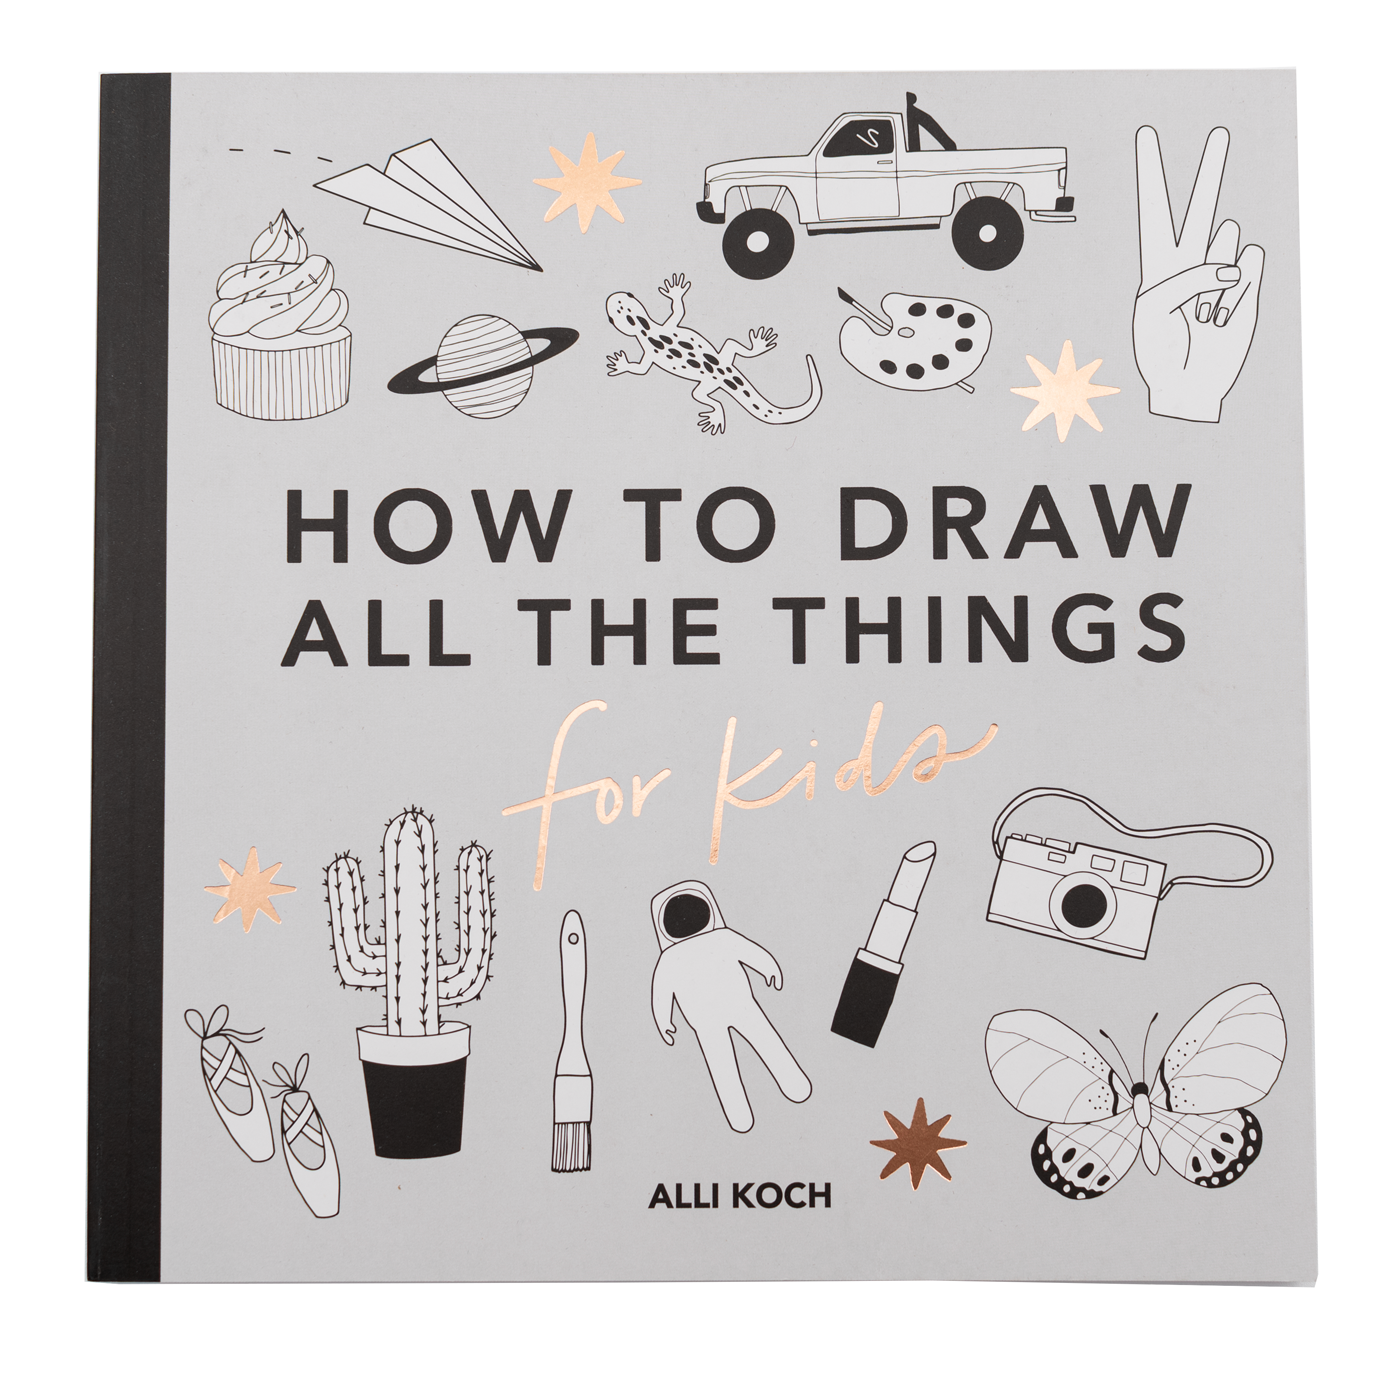 All the Things: How To Draw Book For Kids – Paige Tate and Co.